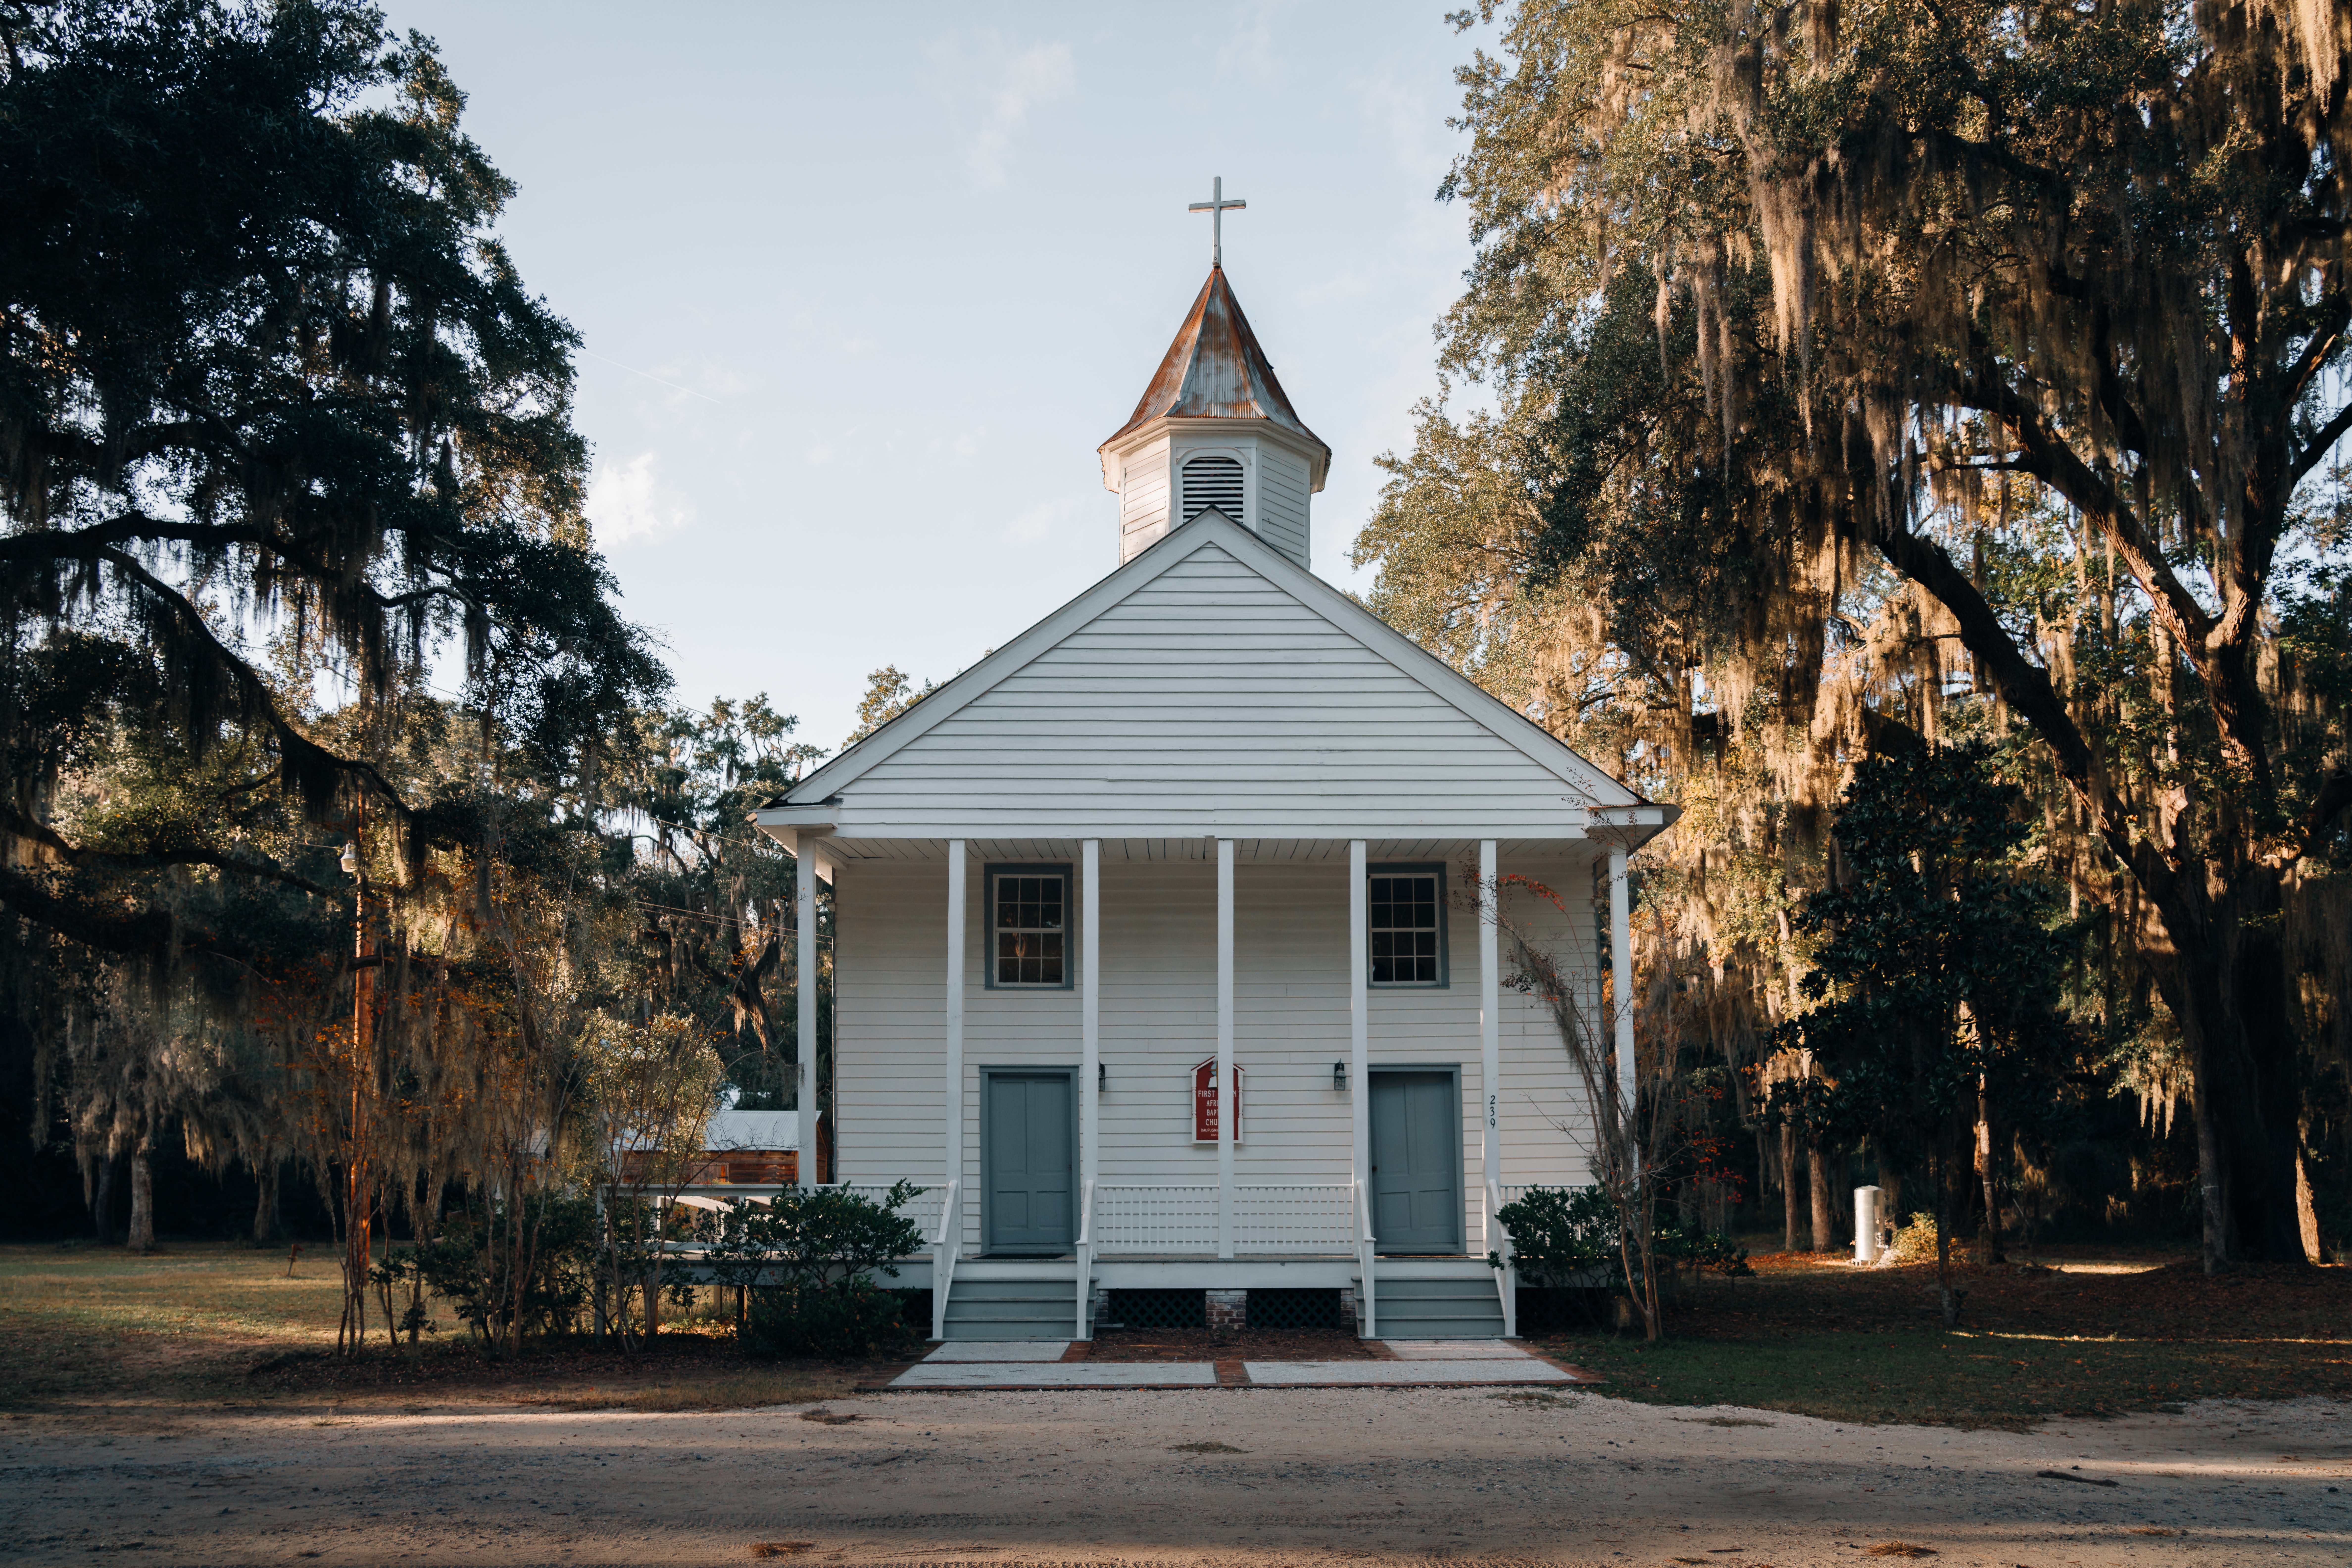 Is My Church Too Small?